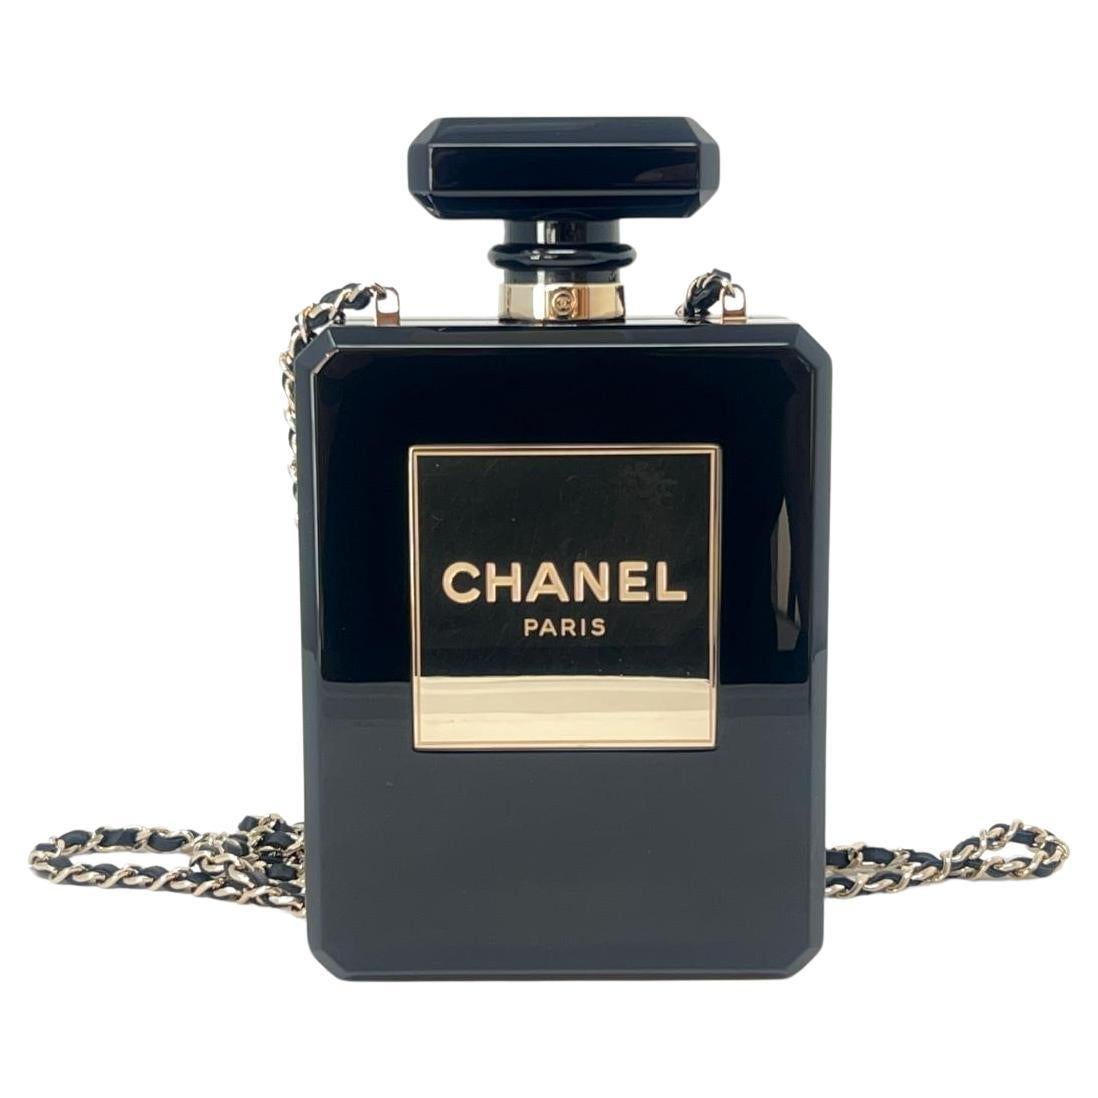 Chanel N5 Black Perfume Bottle Minaudière Cruise Collection 2013  For Sale